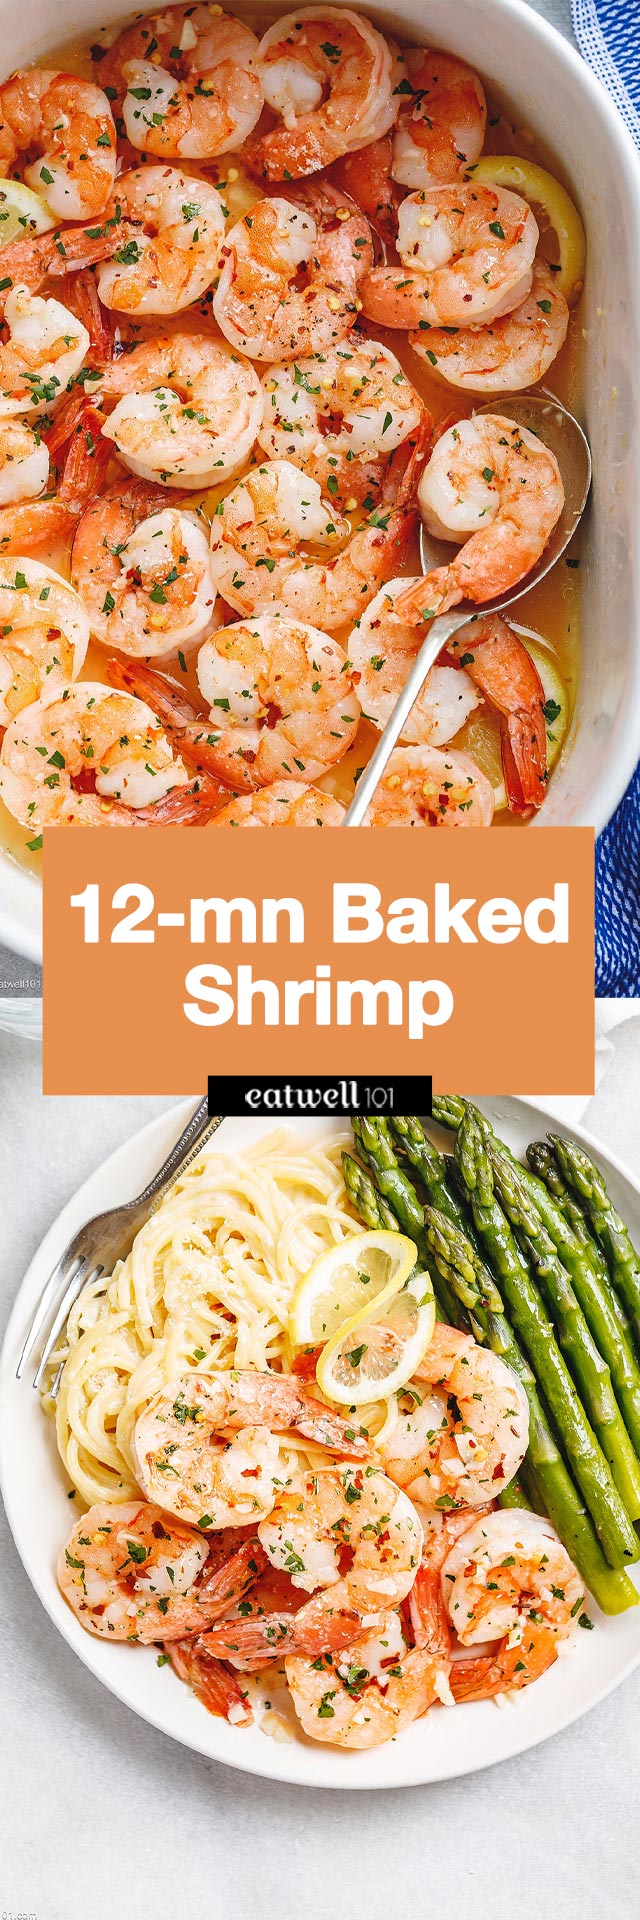 Lemon Garlic Butter Baked Shrimp - #shrimp #baked #recipe #eatwell101 - These baked shrimps are gorgeous and super quick to prepare! Just pop the shrimps in the oven and dinner is ready.